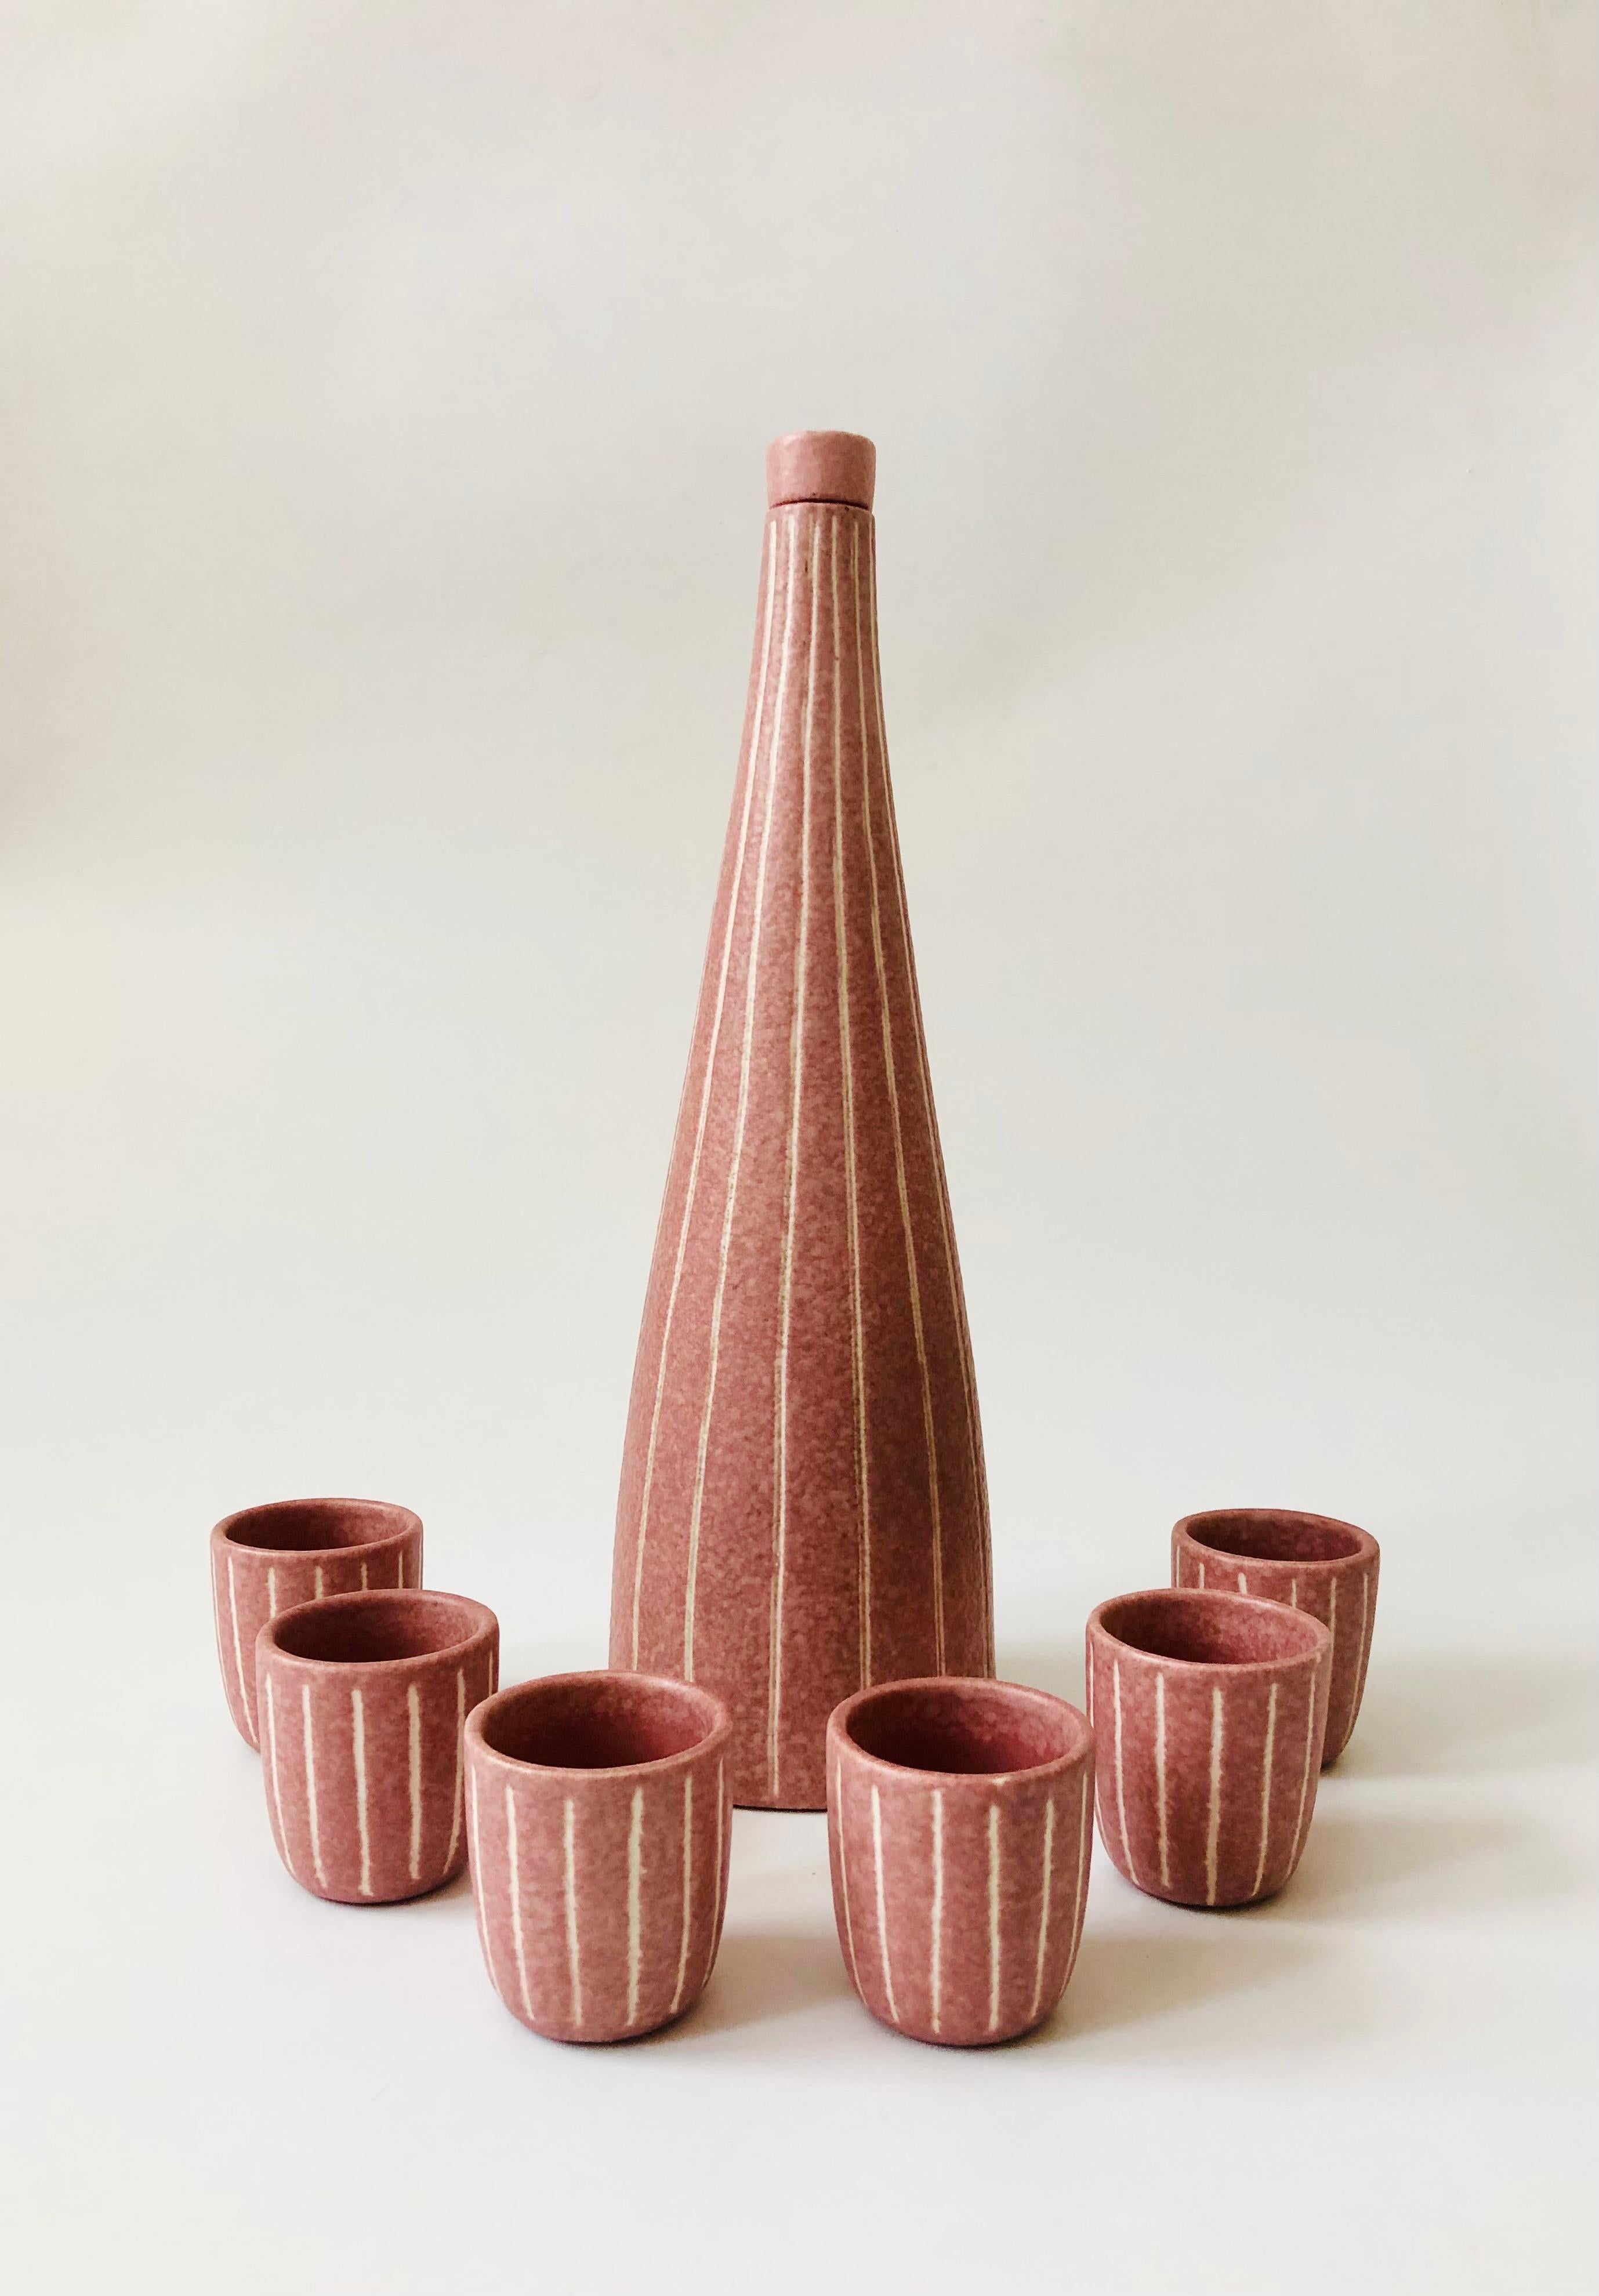 A rare 1980s postmodern pottery decanter set made by Jaru of California. Includes a tall conical decanter with stopper and 6 matching cups. Each piece has been decorated with carved vertical white stripes that contrast with the pink base